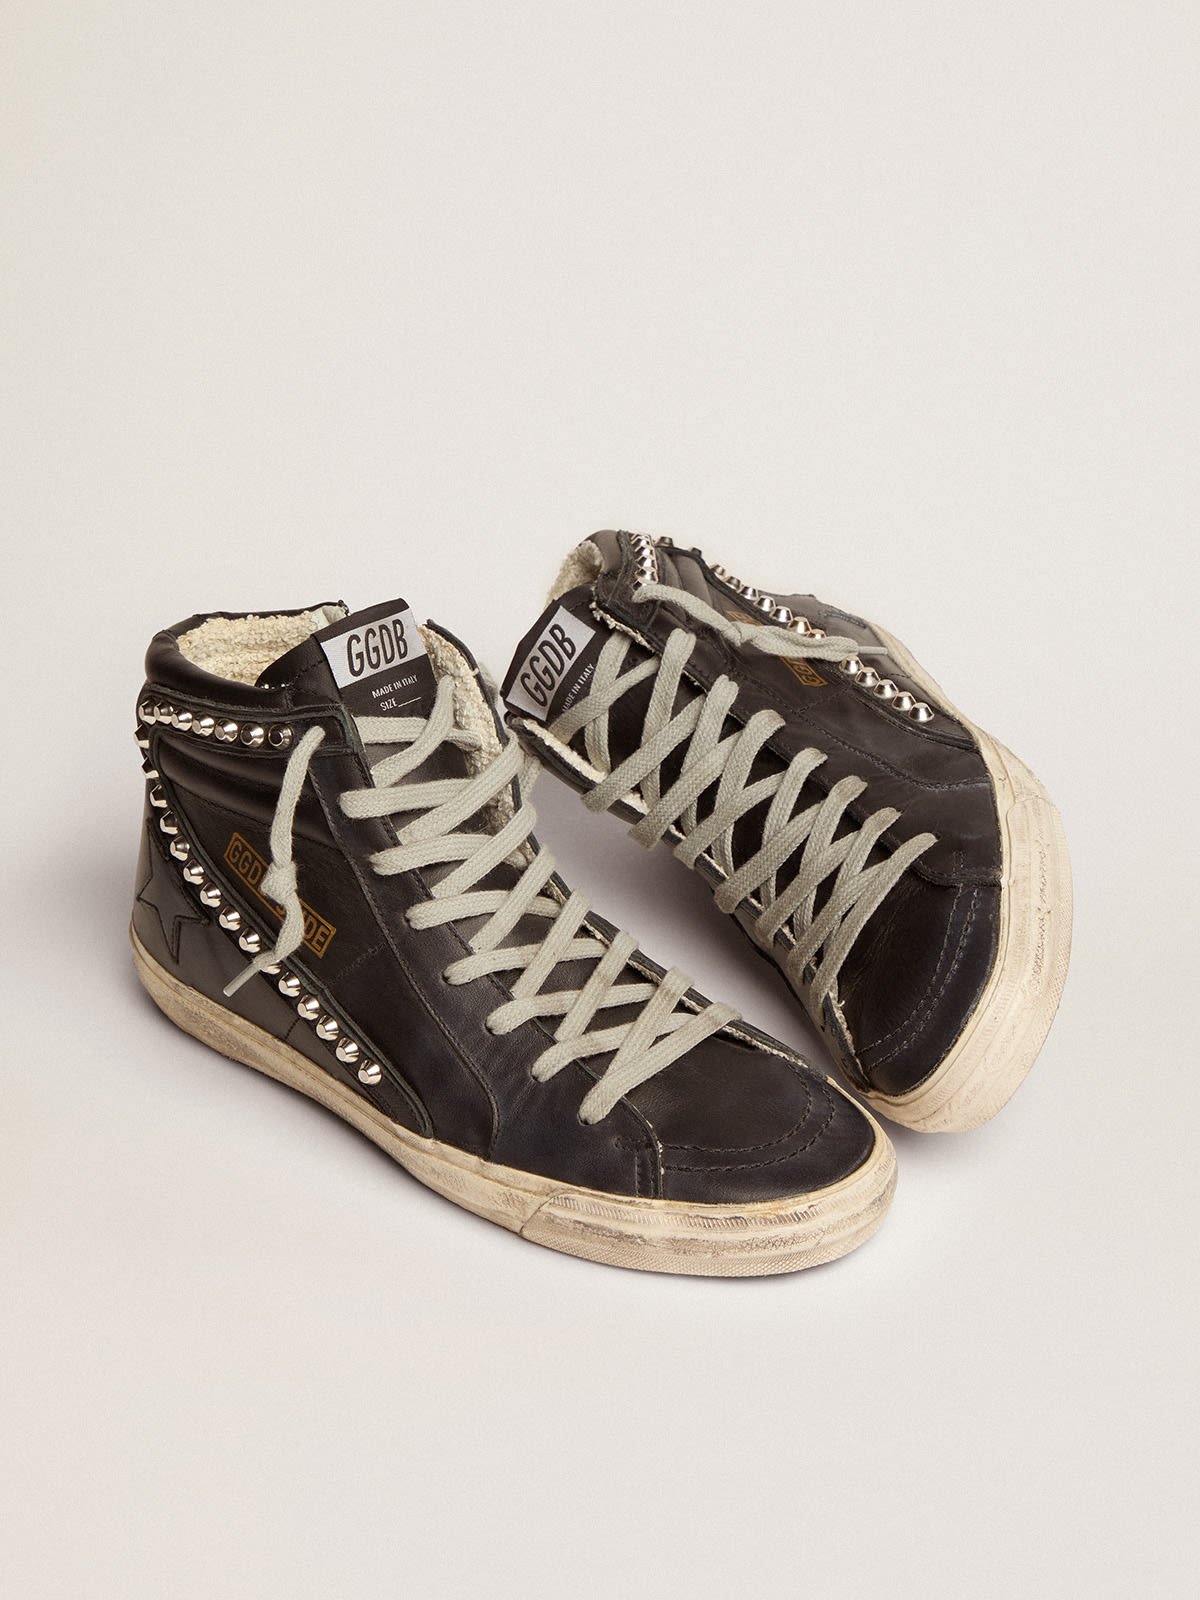 Golden Goose - Sneakers Slide donna con borchie applicate in 